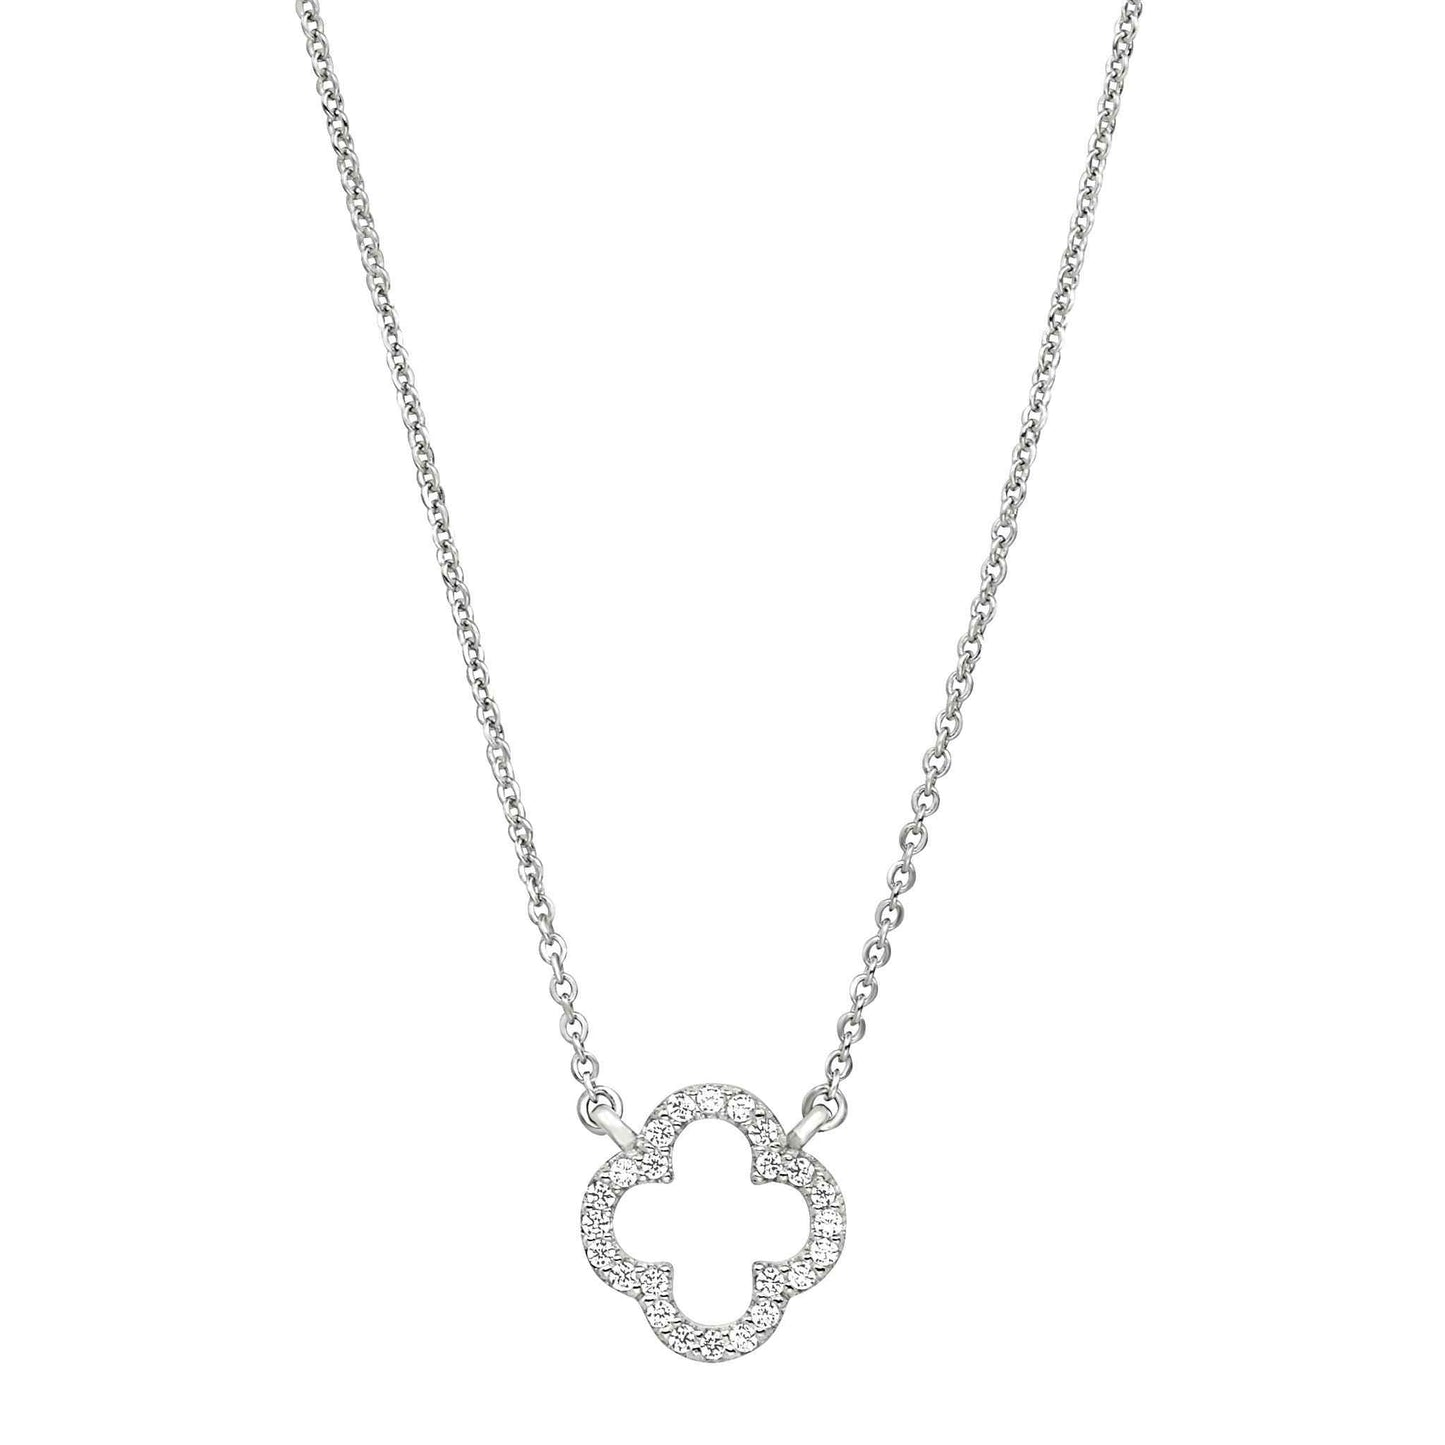 A open clover necklace with simulated diamonds displayed on a neutral white background.